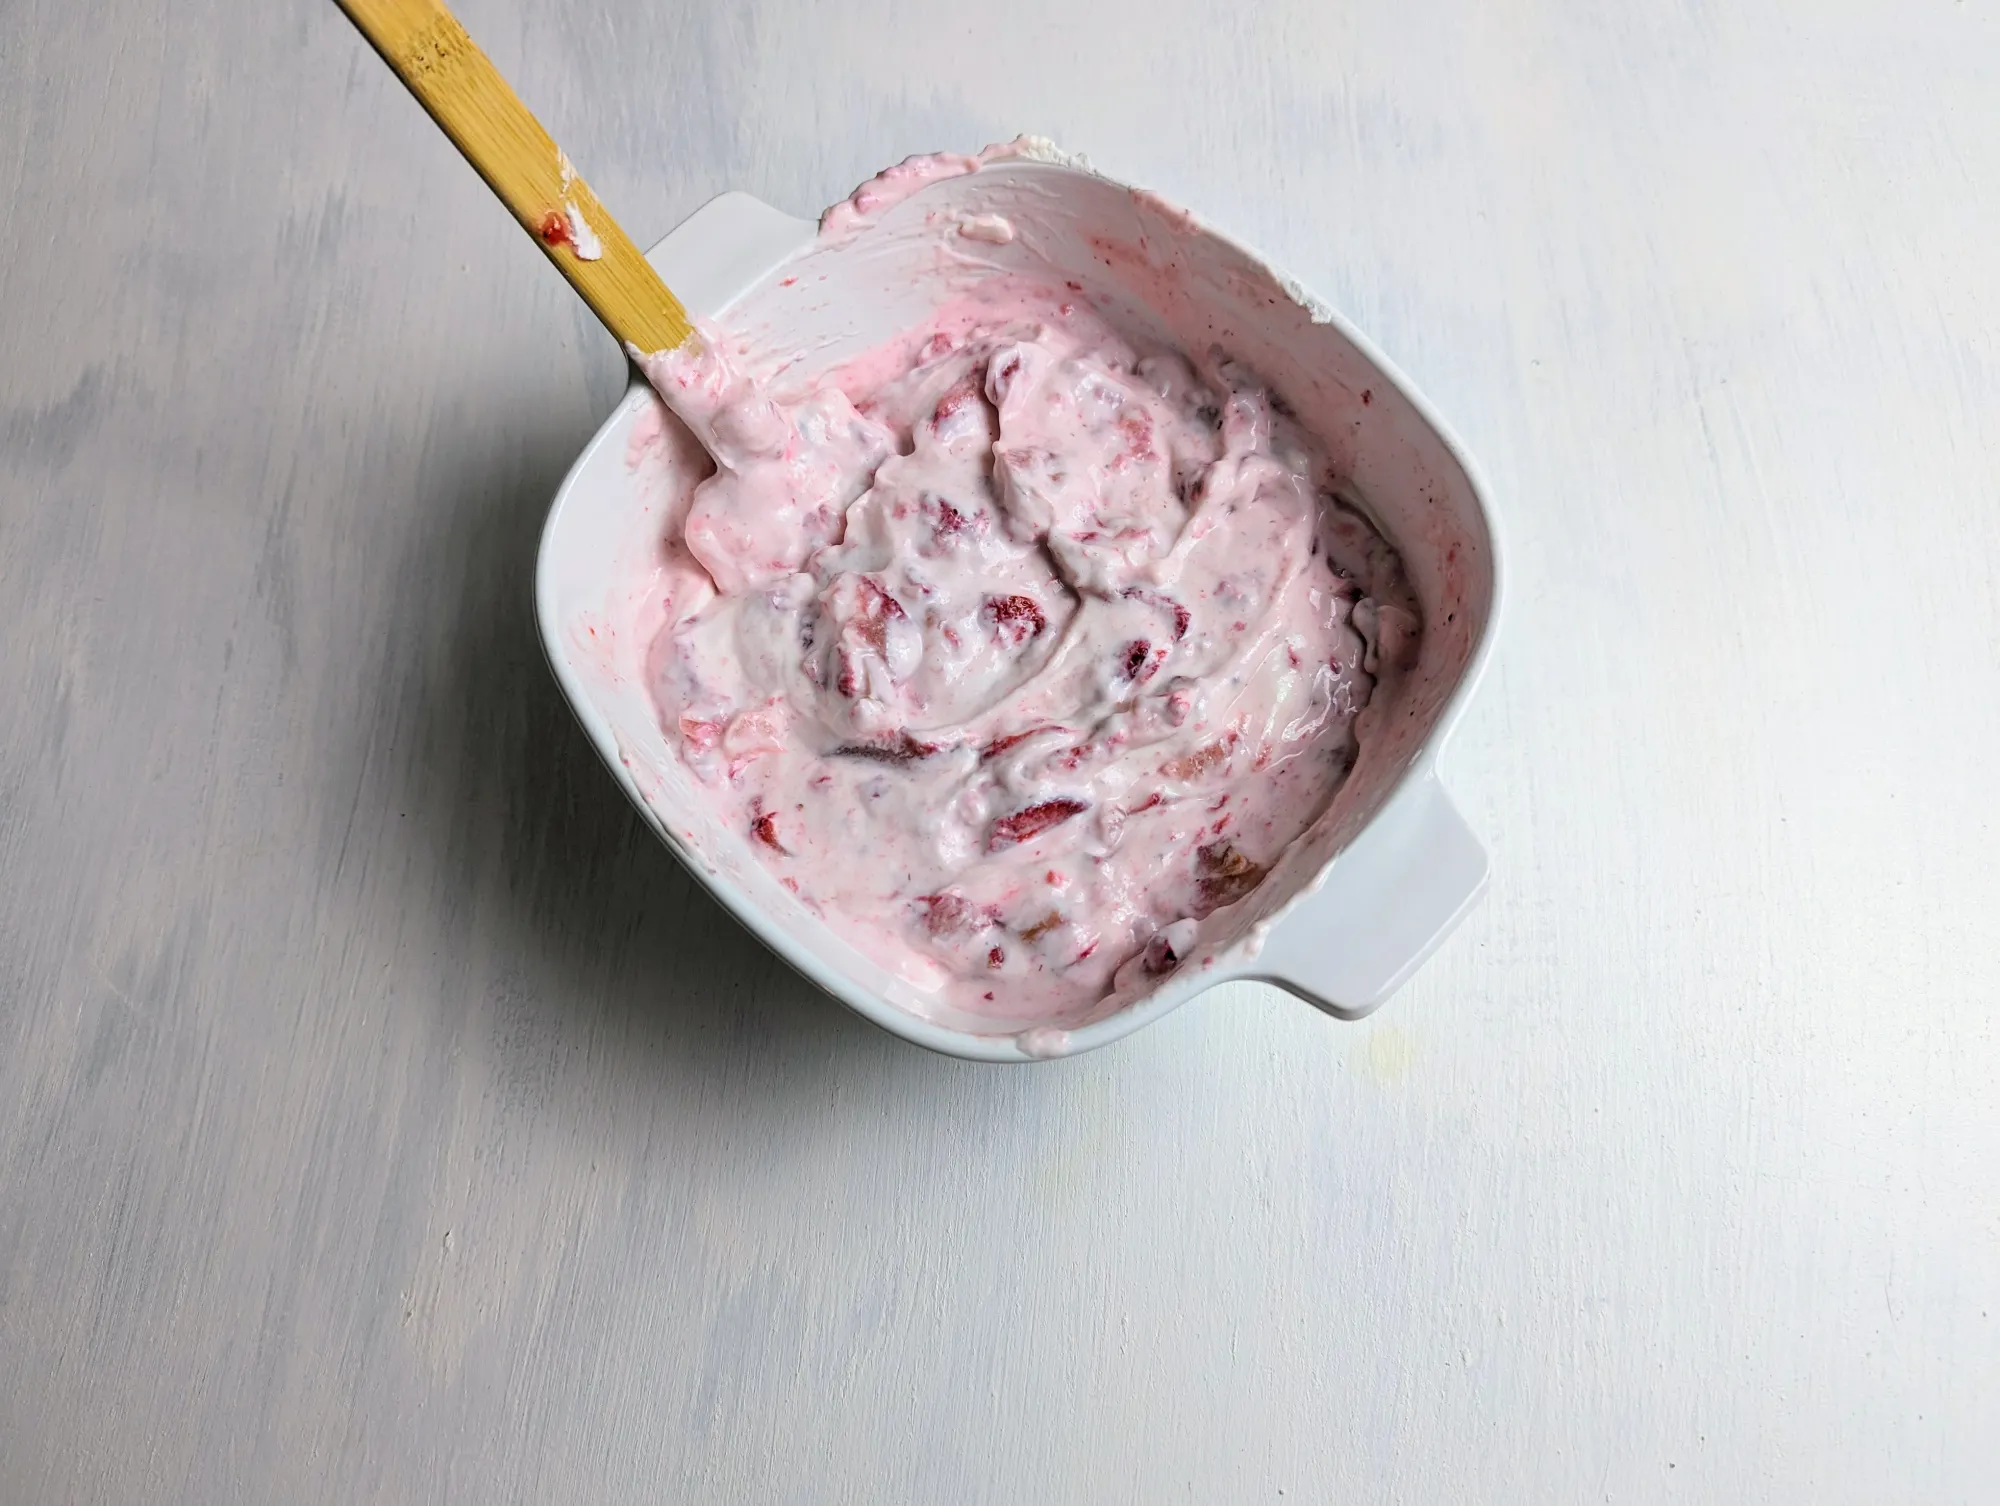 Strawberries and yogurt mixed together in a bowl